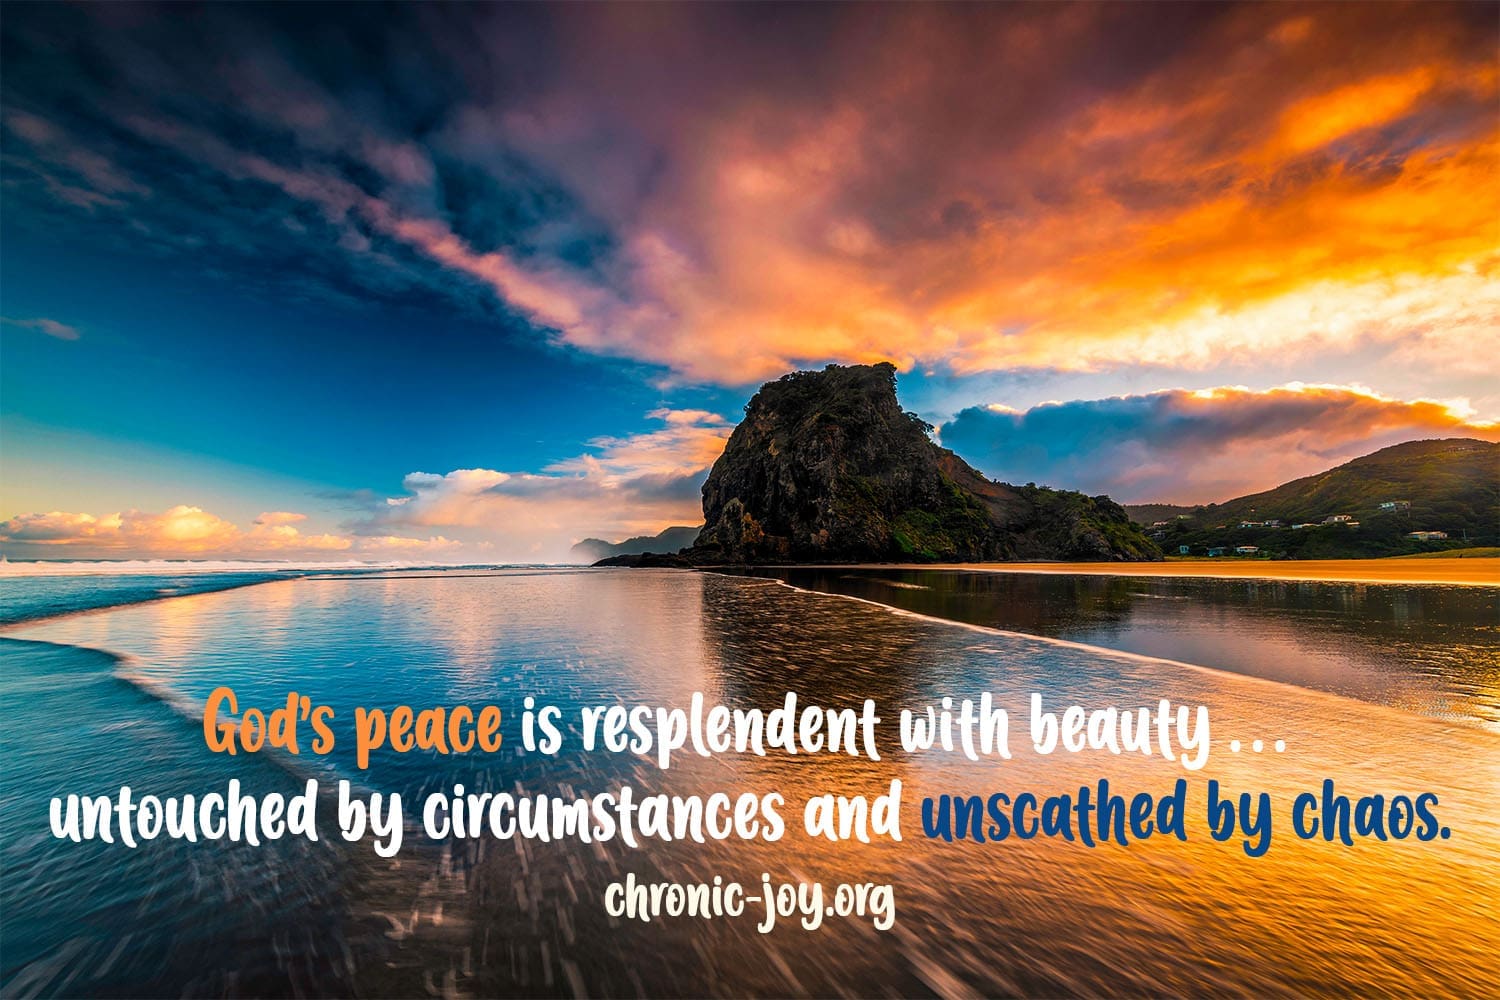 God’s peace is resplendent with beauty … untouched by circumstances and unscathed by chaos.